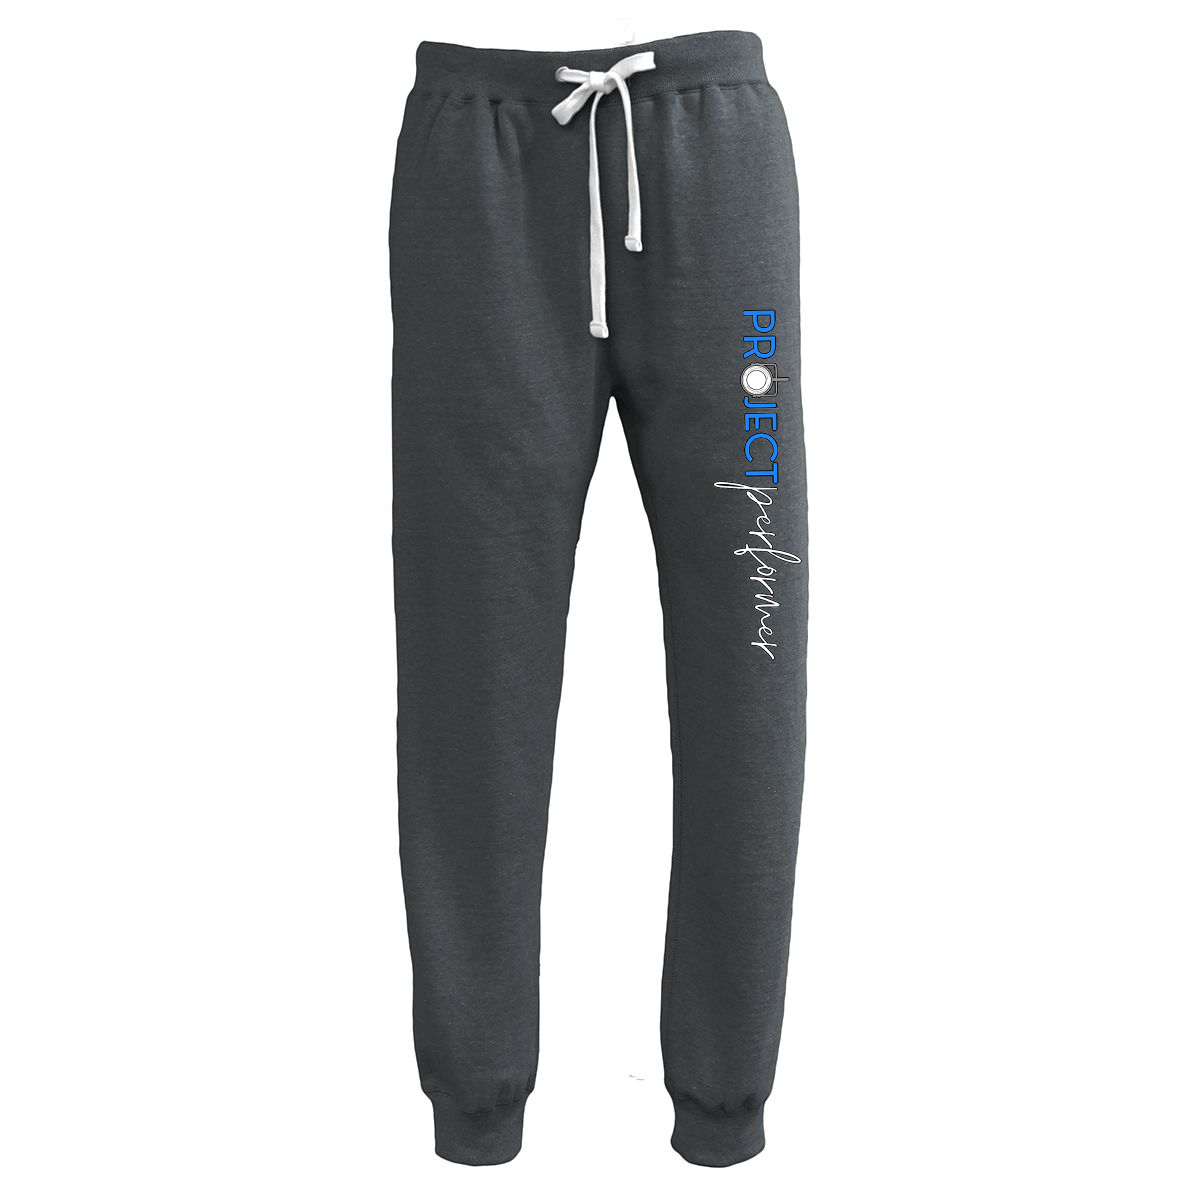 Project Performer Joggers